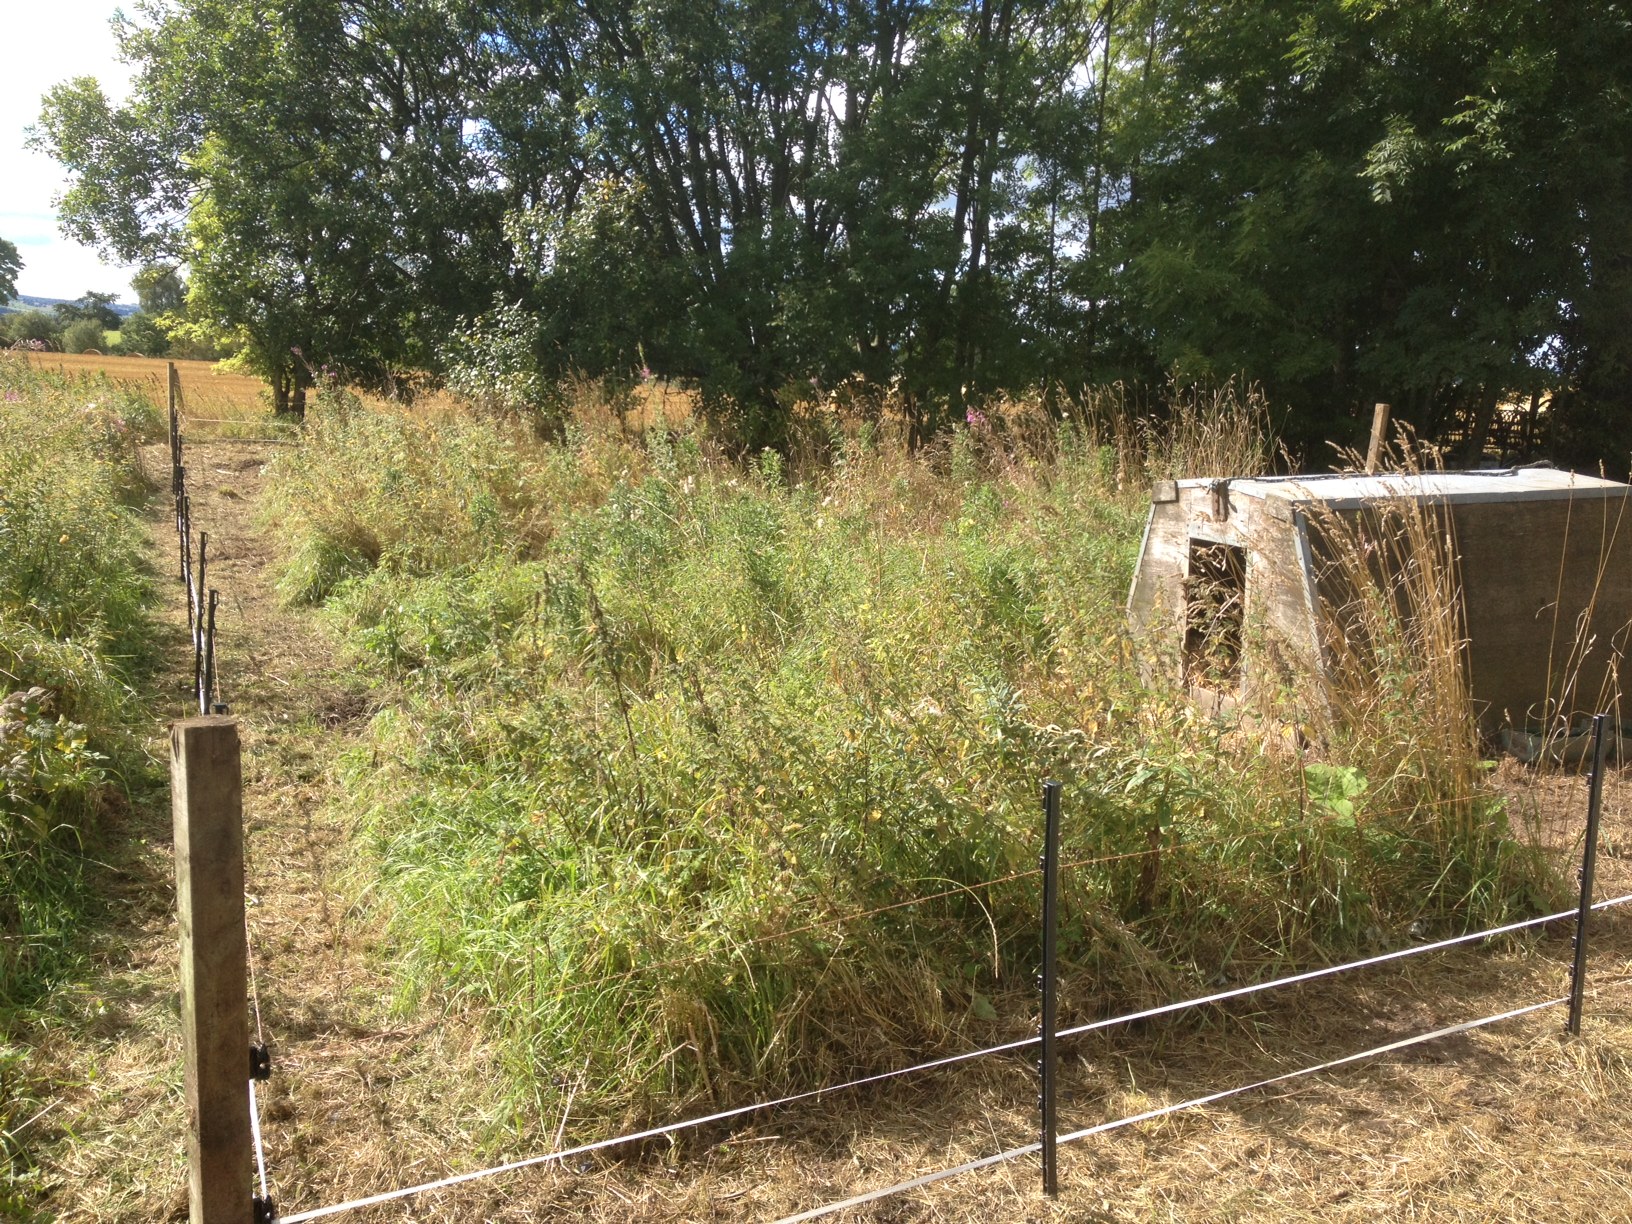 Electric Fence Story - Back Yard Pigs?